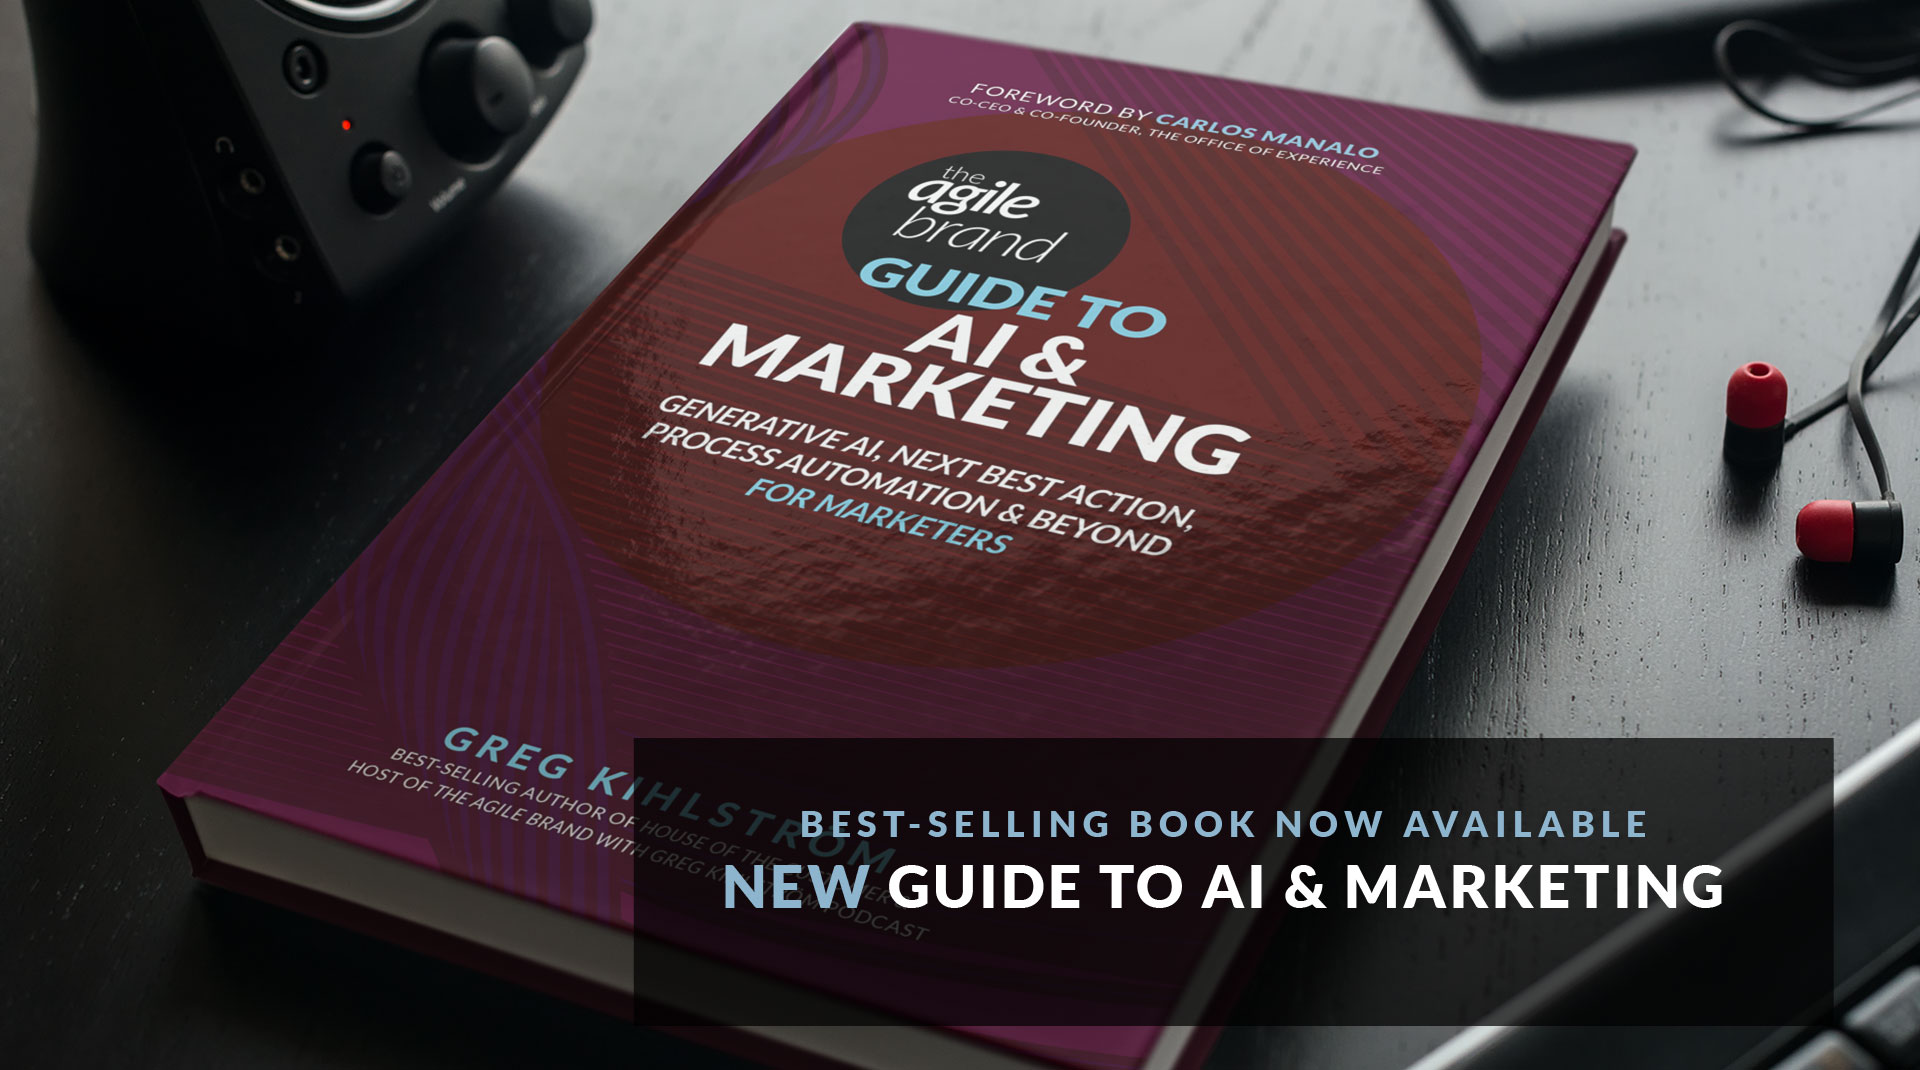 The Agile Brand Guide to AI & Marketing is now available